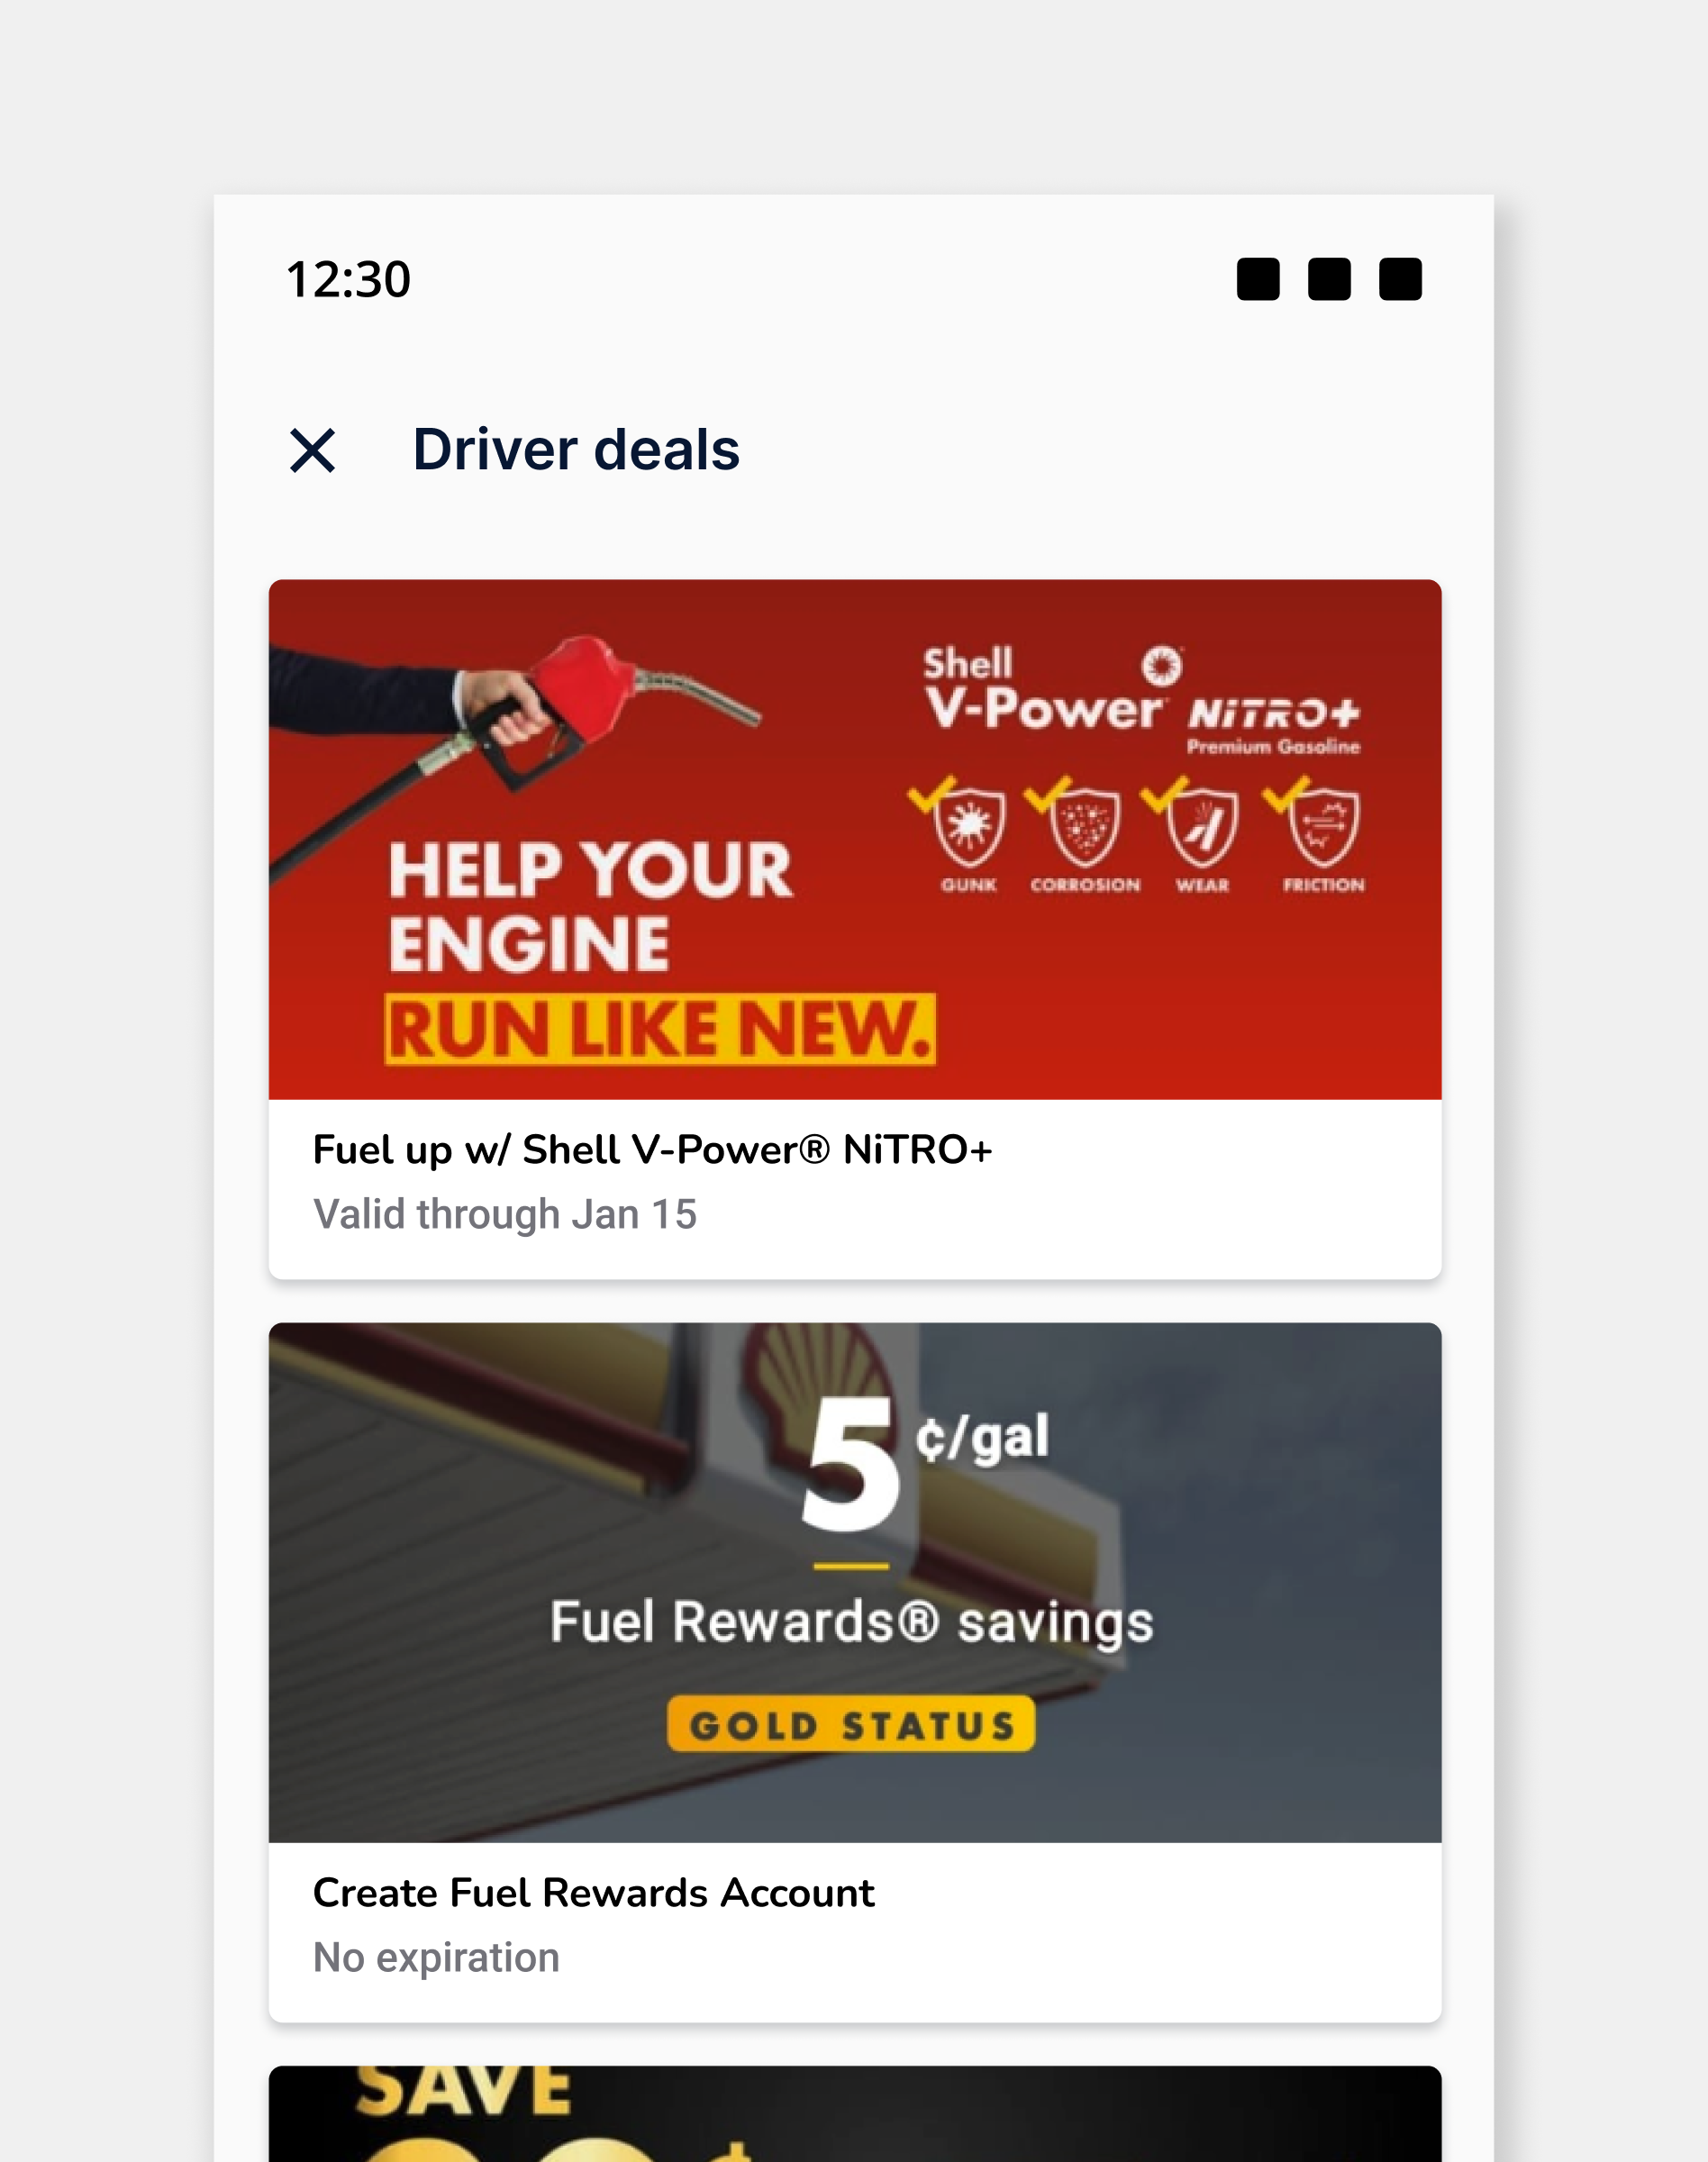 Mobile phone screen showcasing a series of driver deals.